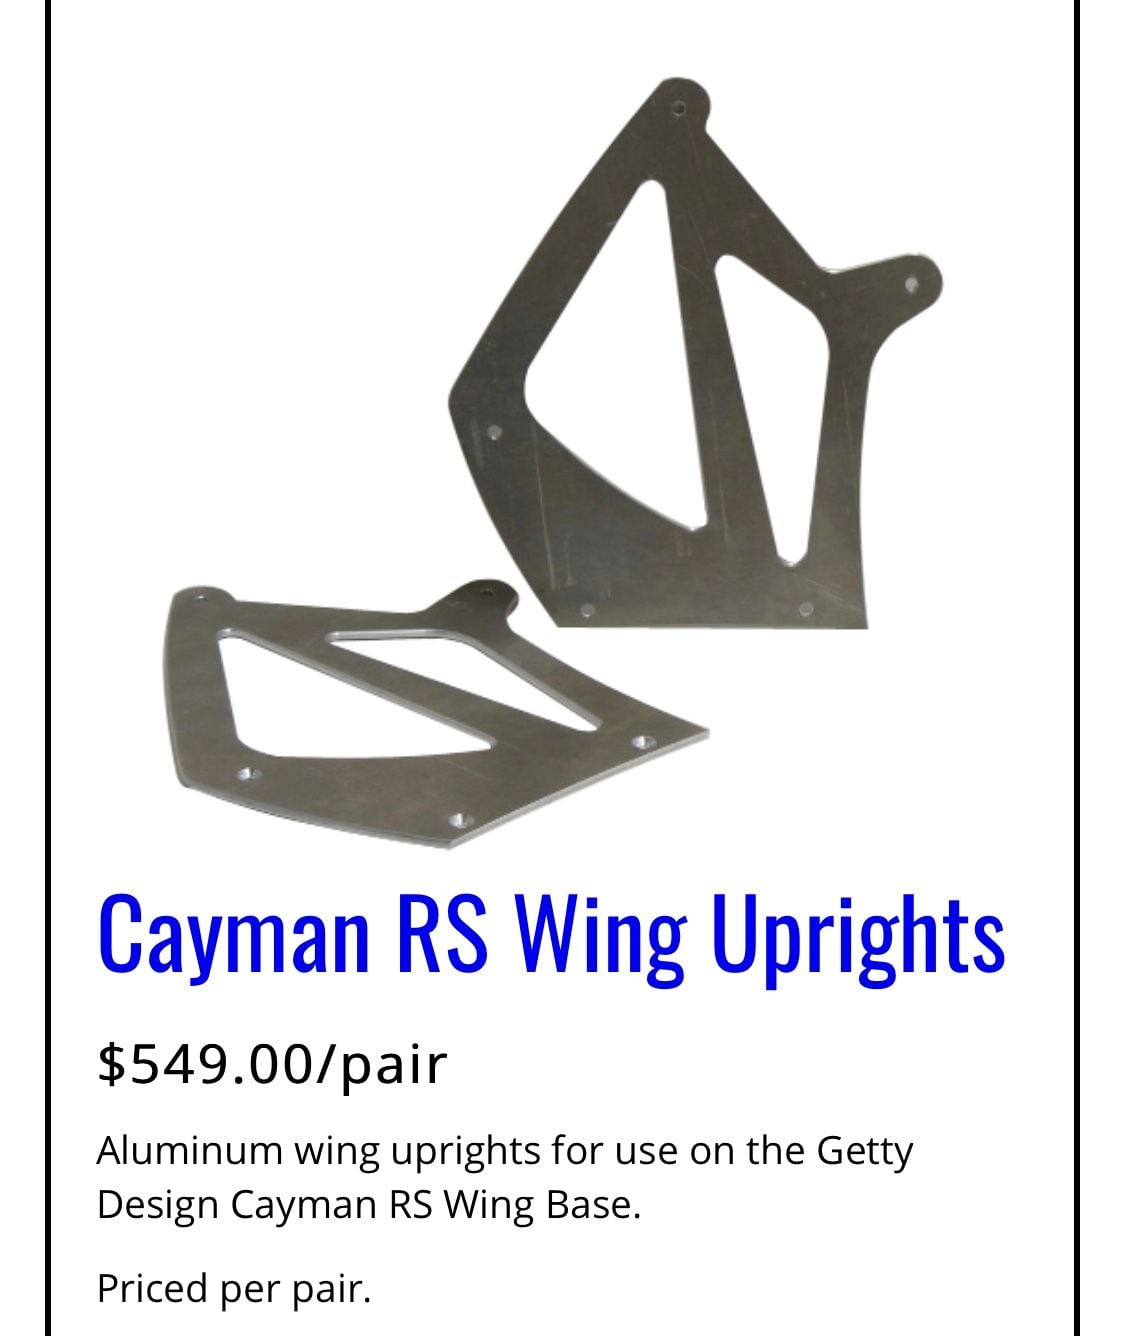 Exterior Body Parts - Cayman RS Uprights Getty Design 987 - New - Livermore, CA 94550, United States